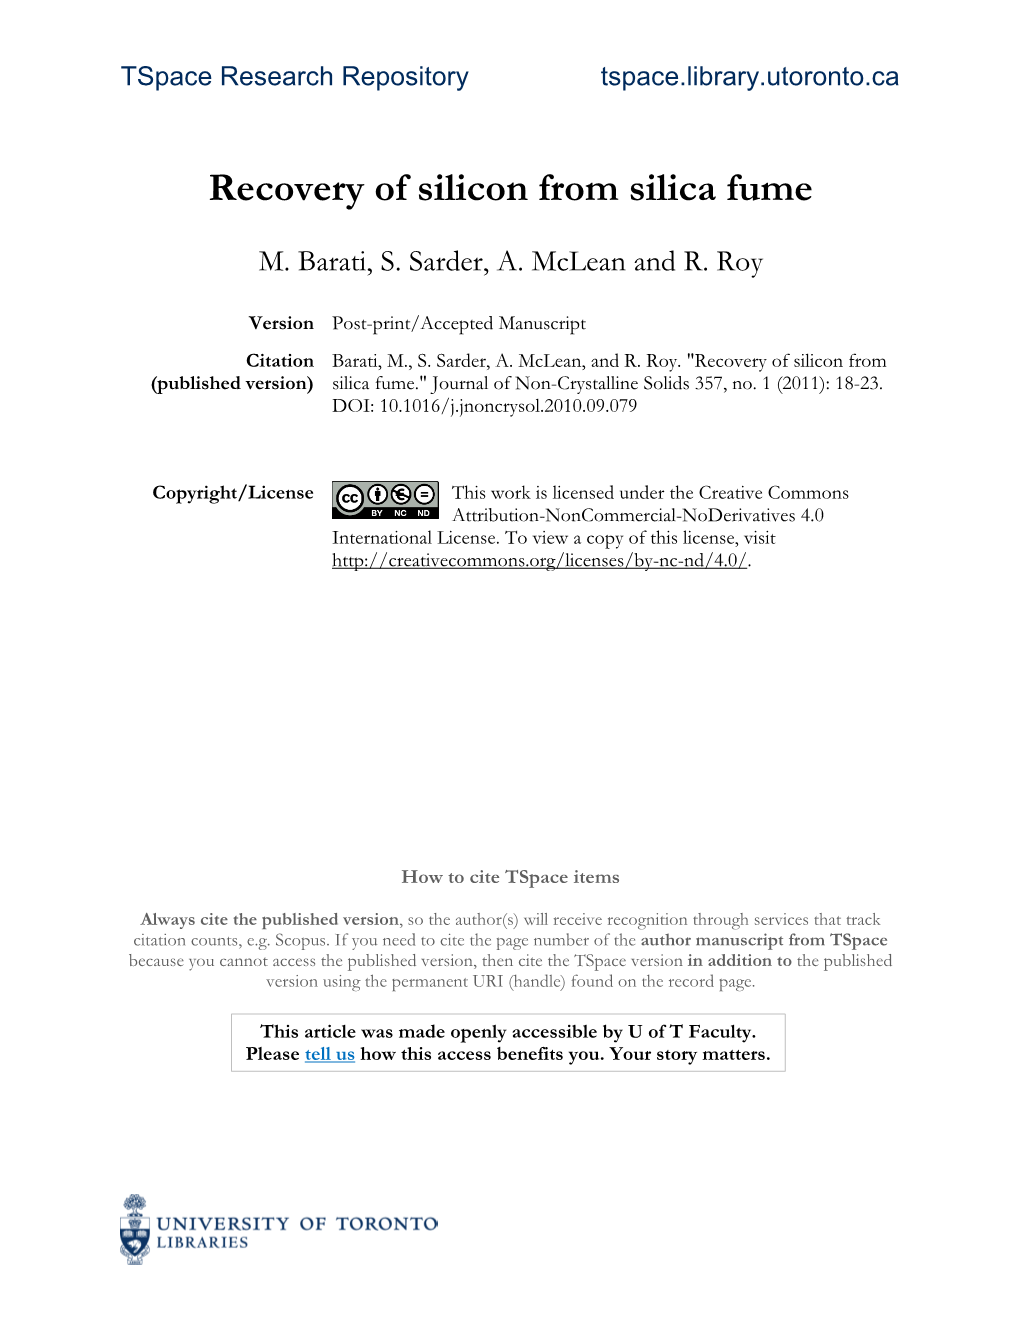 Recovery of Silicon from Silica Fume